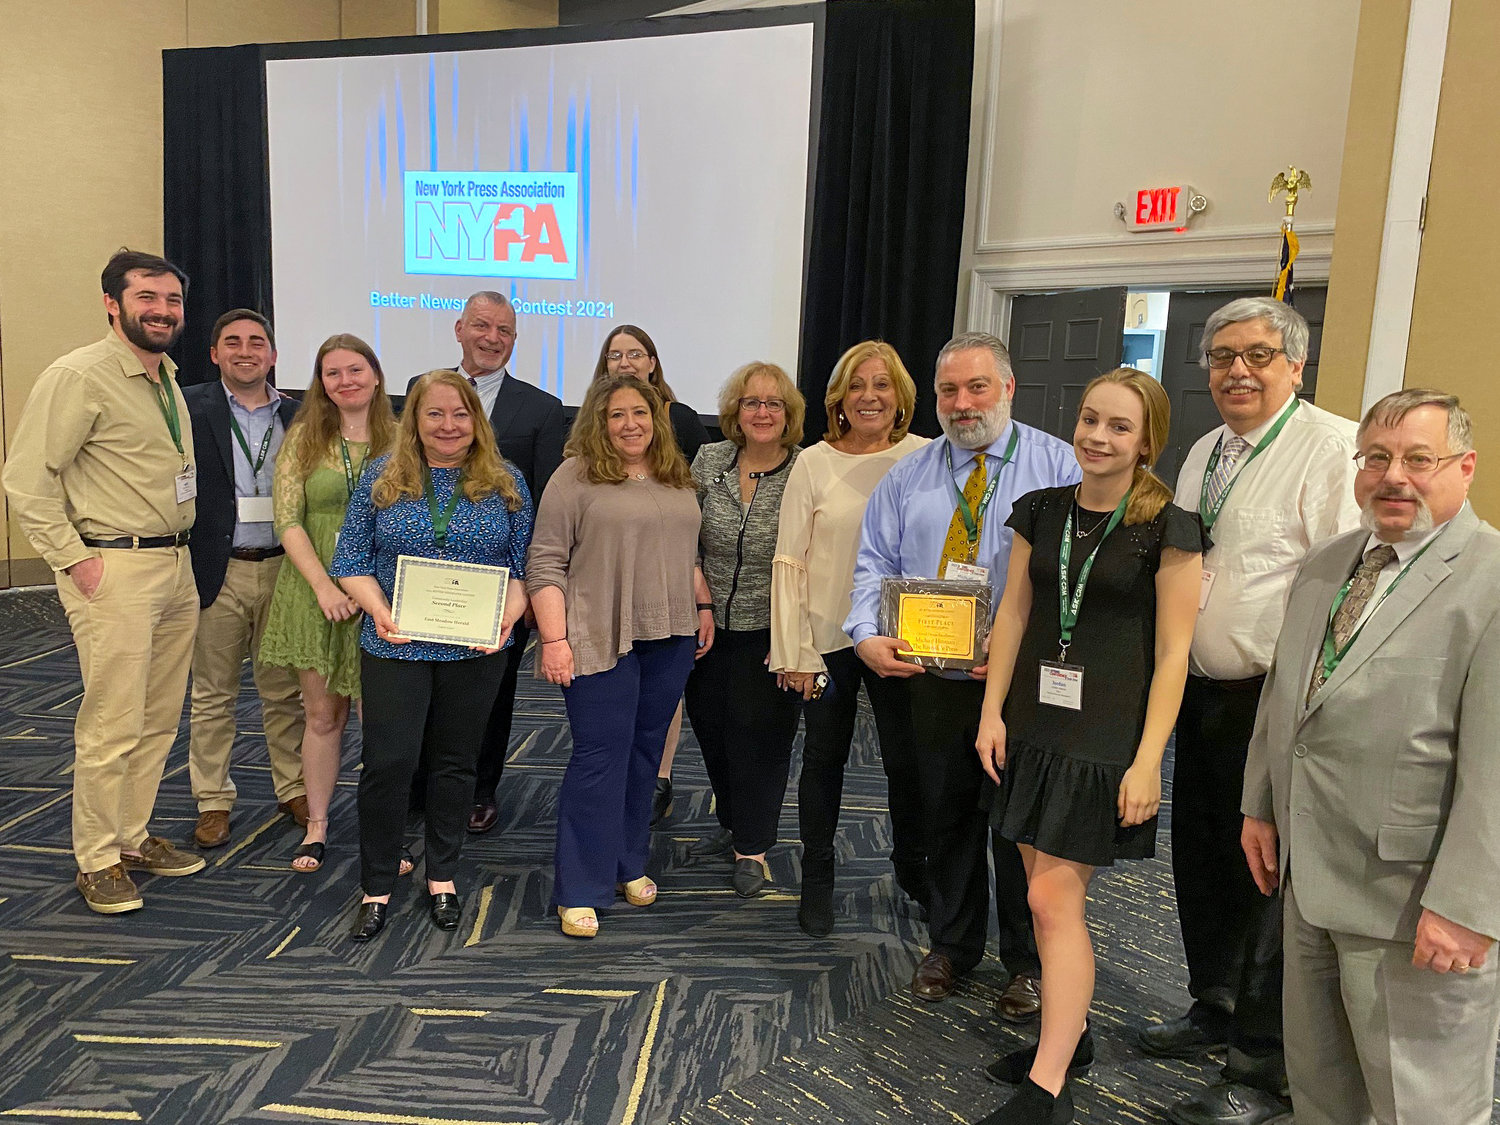 Herald Community Newspapers was well-represented at the New York Press Association’s spring conference in Saratoga Springs last weekend, where the group won a total of 28 state awards. From left, reporters Will Sheeline and Tom Carrozza; senior reporter Mallory Wilson; publisher emeritus Cliff Richner; senior editor Laura Lane; senior reporter Karina Kovac; sales/marketing associate Jessica Kleiman; digital sales manager Lori Berger; sales vice president Rhonda Glickman; executive editor Michael Hinman; senior reporter Jordan Vallone; Riverdale Press editor Gary Larkin; and deputy editor Jeffrey Bessen.